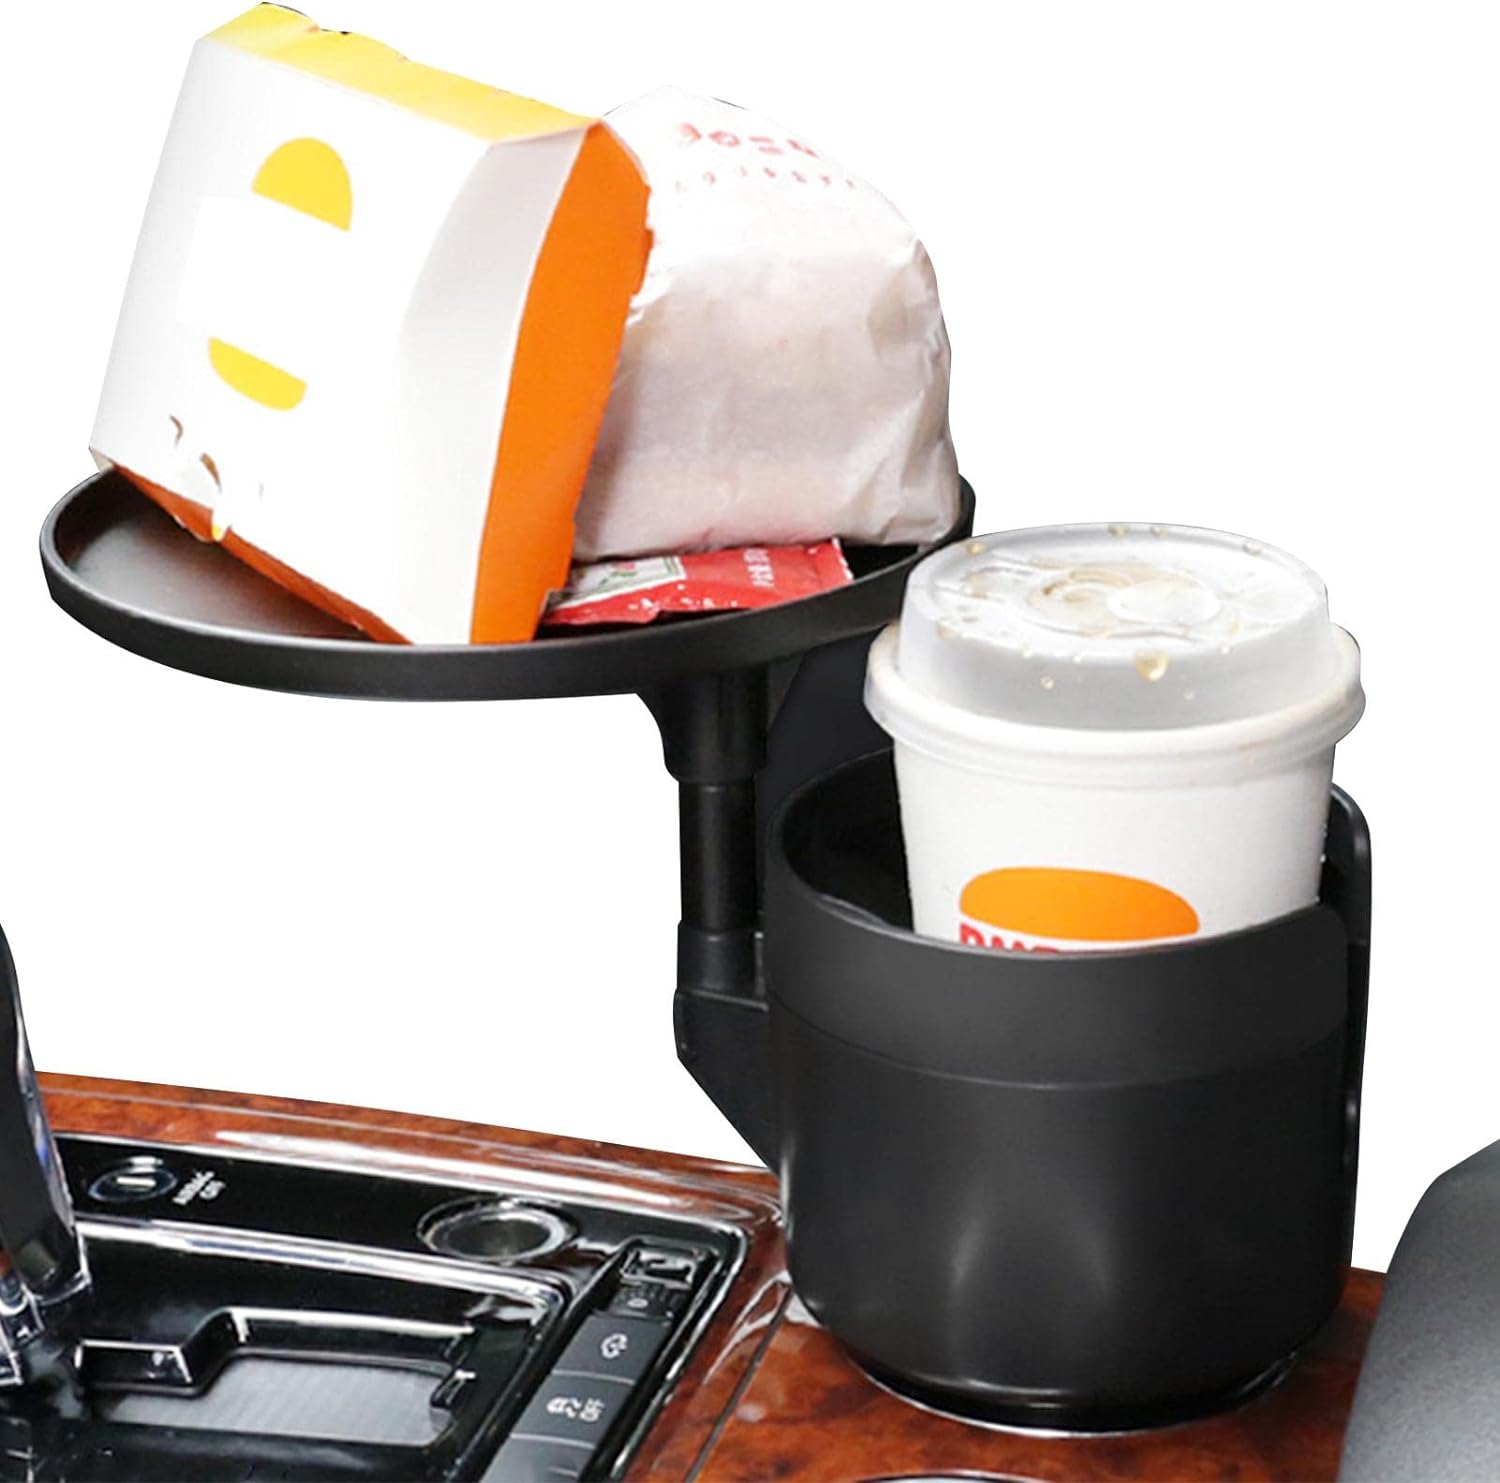 Table with expandable cup holder for car 2 in 1